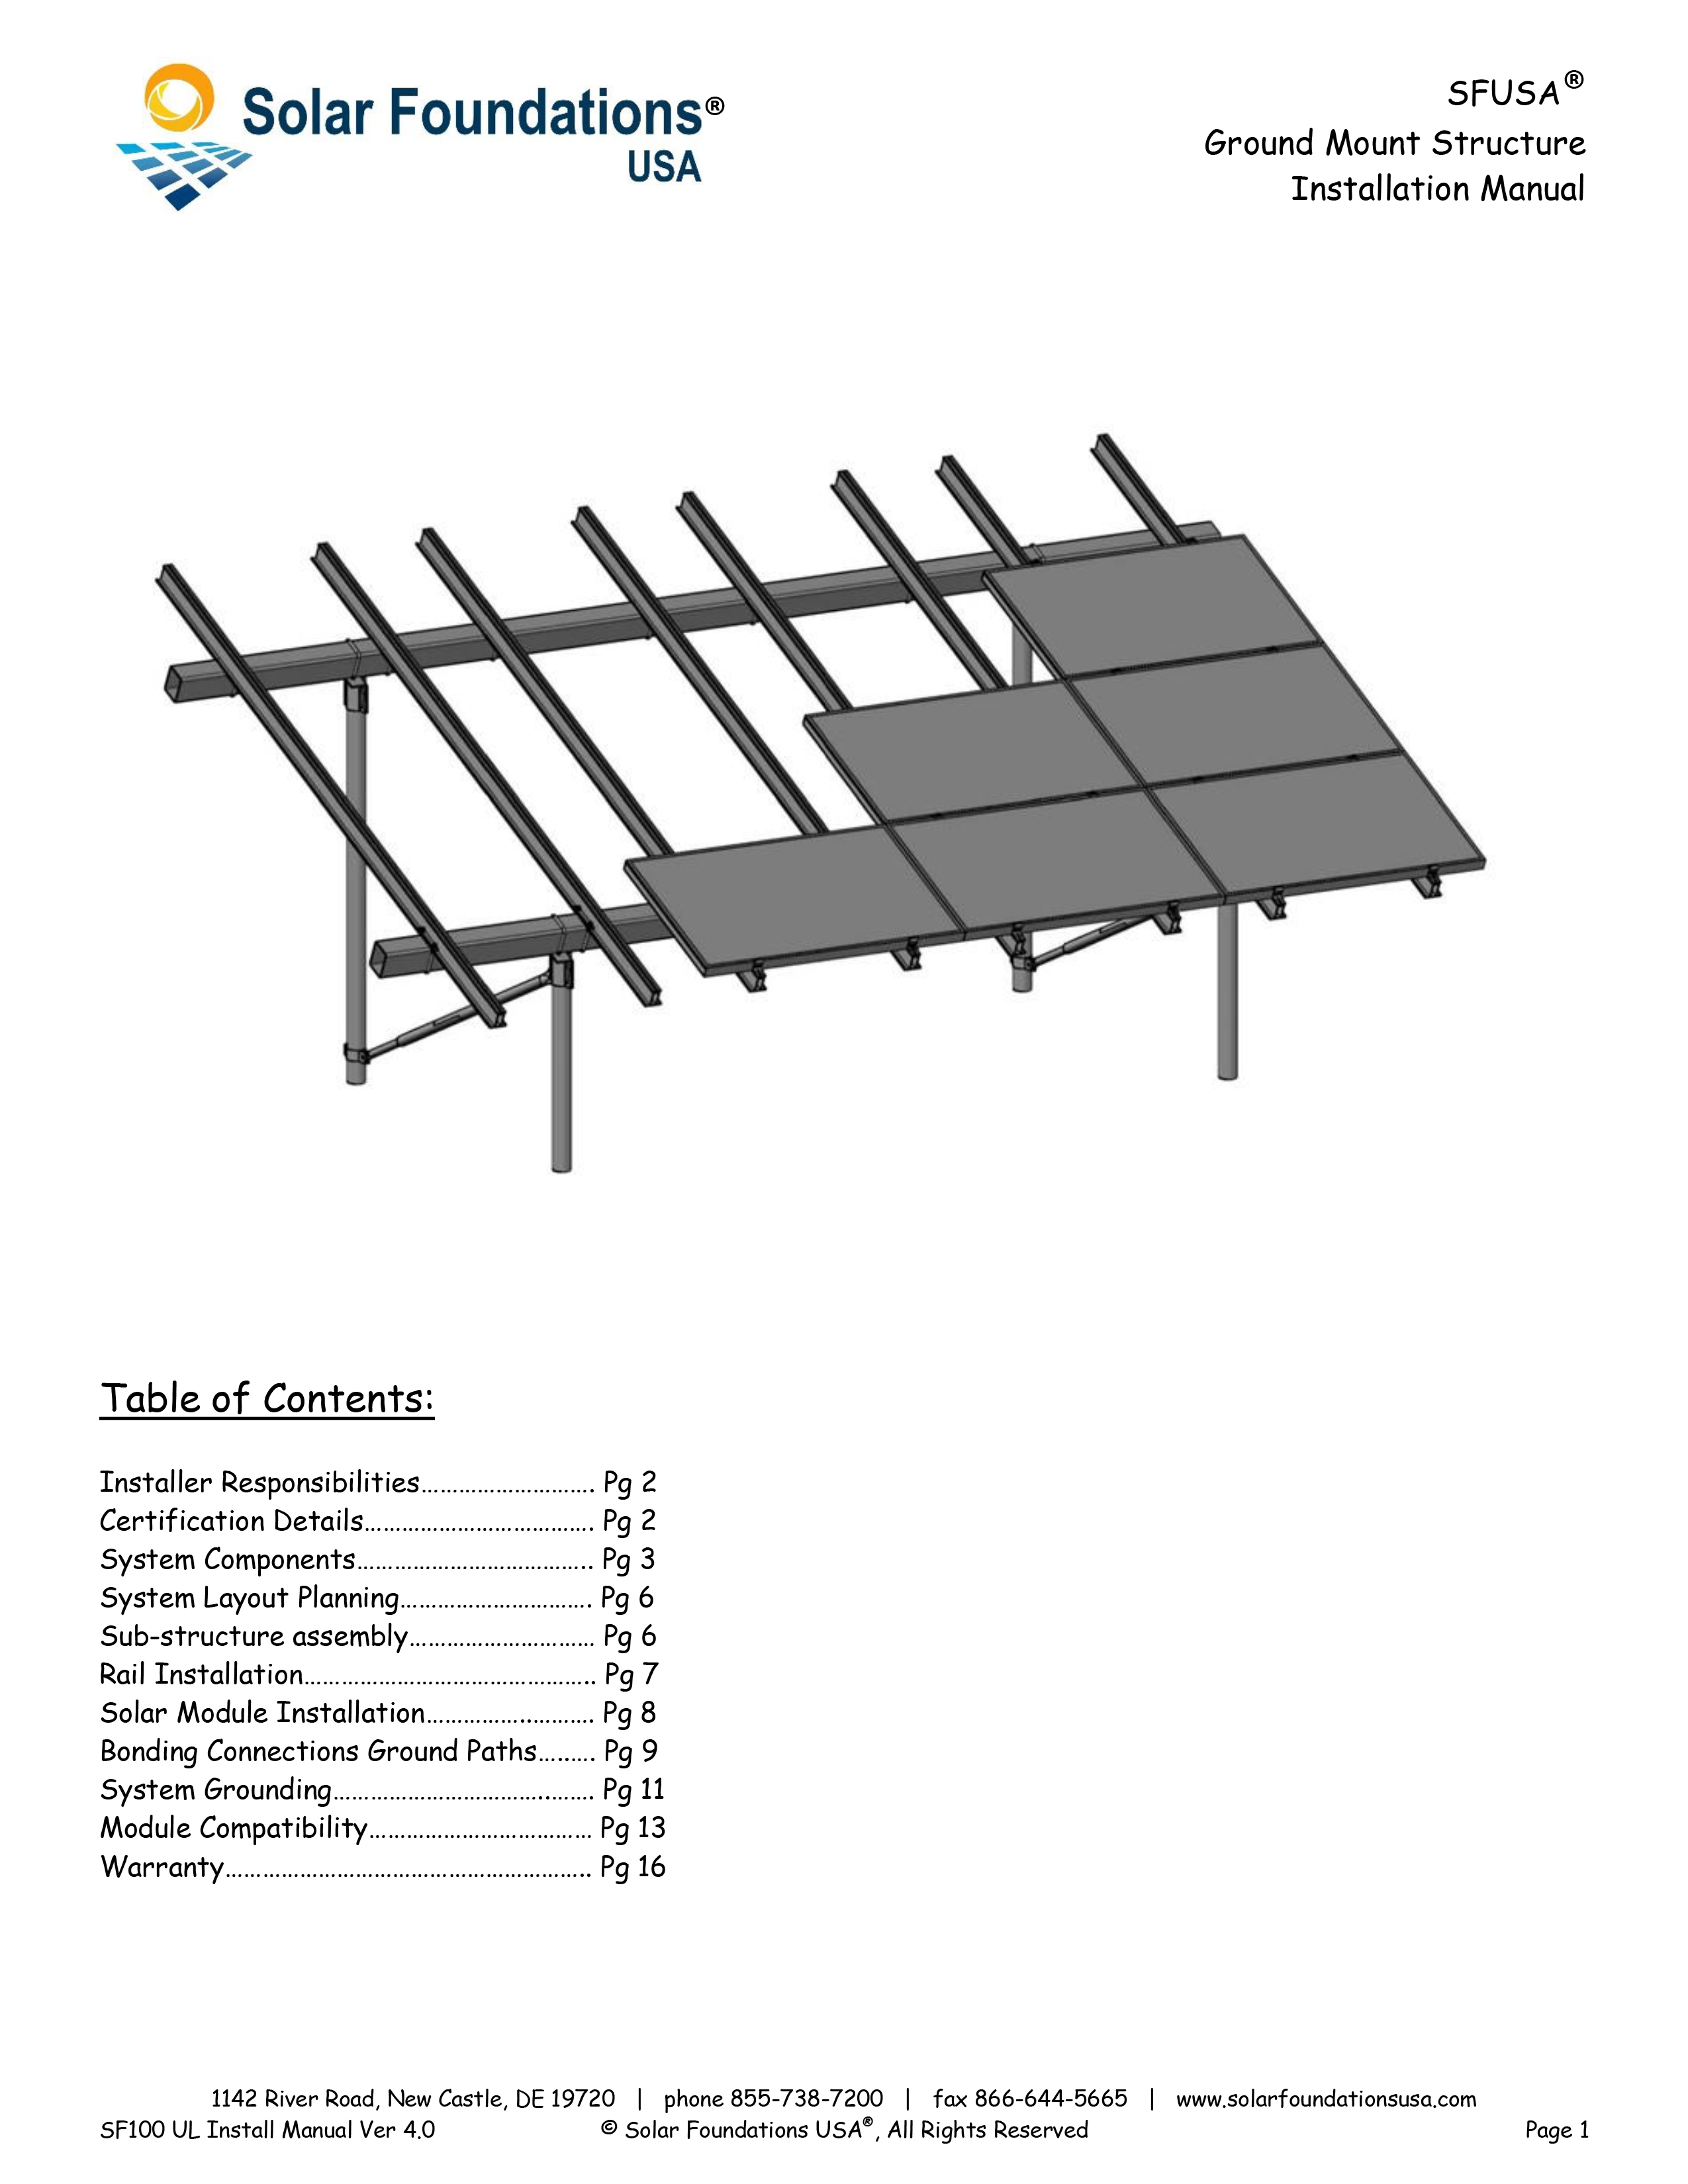 Uploaded Image: /vs-uploads/components-preview/HollowStructuralSections_HSS-Cover.jpg